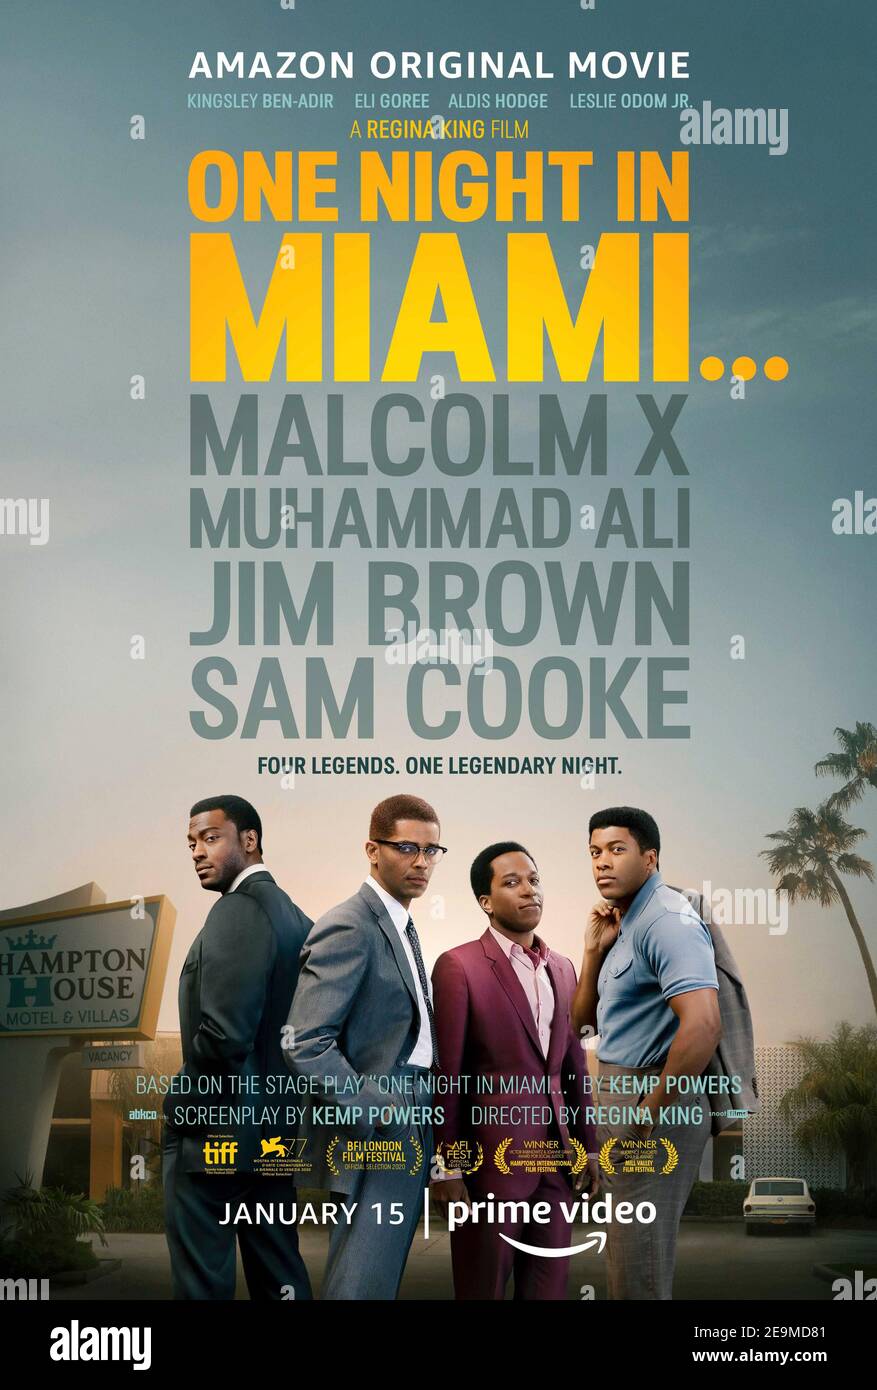 One Night in Miami (2020) directed by Regina King and starring Kingsley Ben-Adir, Eli Goree and Aldis Hodge. A fictional account of one incredible night where icons Muhammad Ali, Malcolm X, Sam Cooke, and Jim Brown gathered discussing their roles in the Civil Rights Movement and cultural upheaval of the 60s. Stock Photo